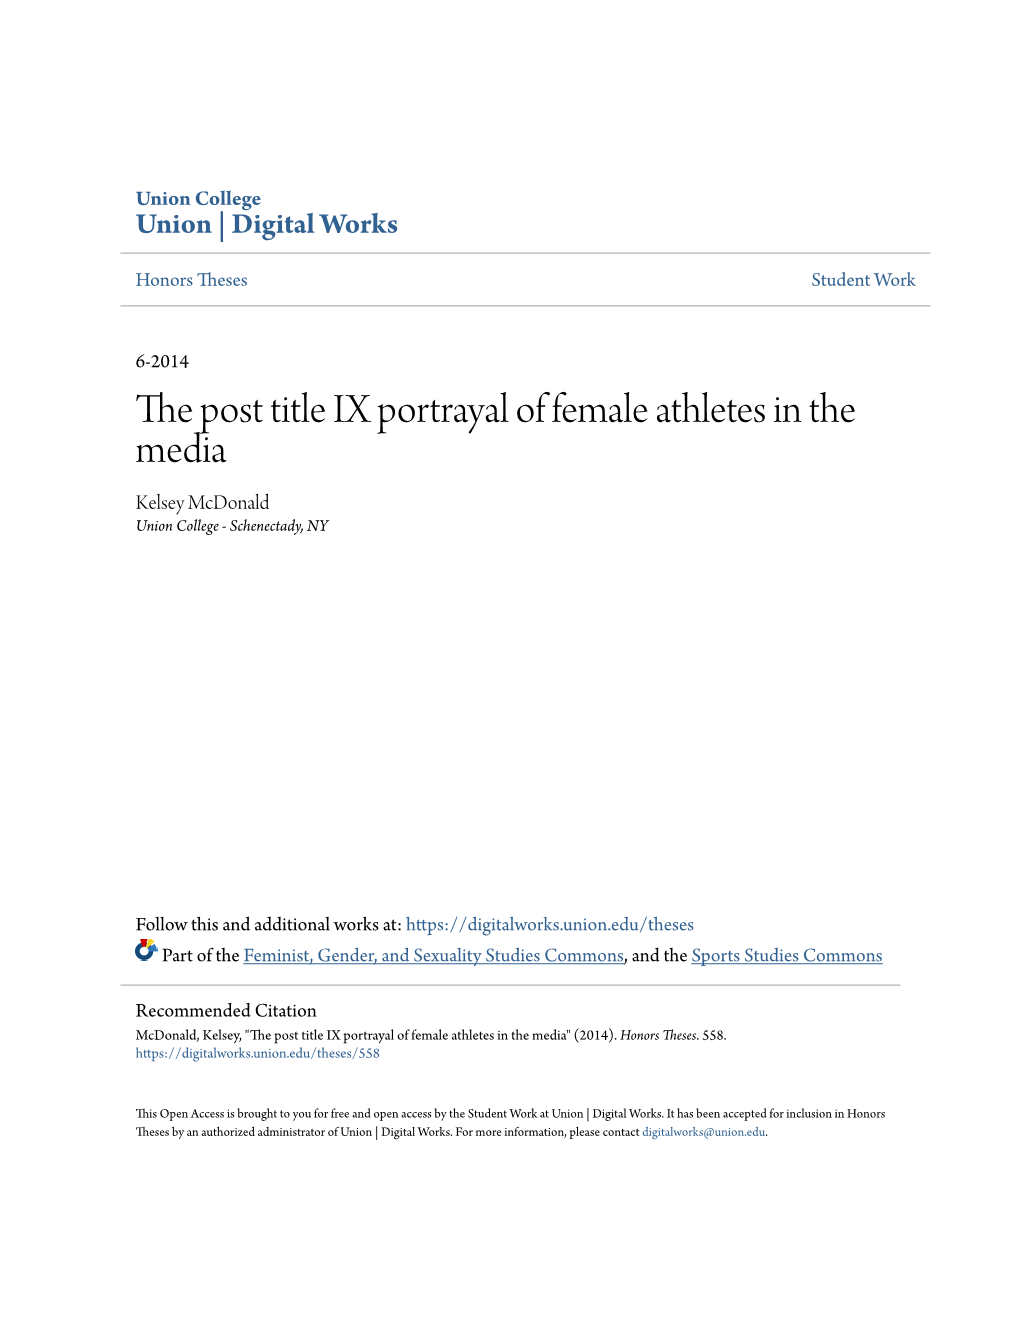 The Post Title IX Portrayal of Female Athletes in the Media Kelsey Mcdonald Union College - Schenectady, NY